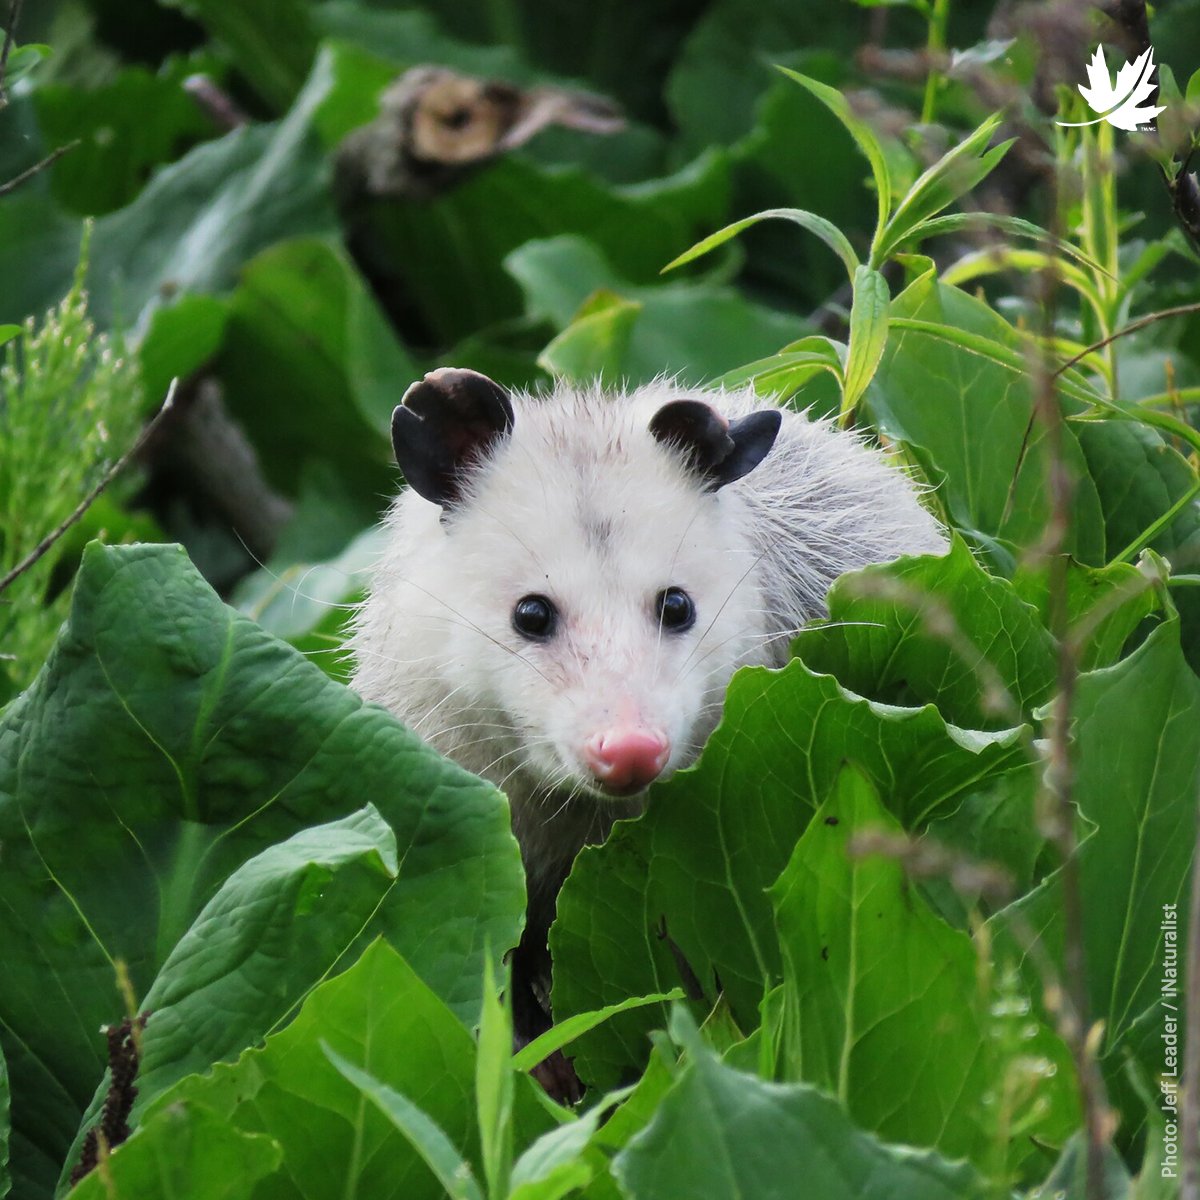 Did you know opossums are a vital member of nature’s cleanup crew? They play a crucial role in cleaning up the debris left behind by other animals. They consume overripe fruits that have fallen to the ground, recycle organic matter, control pests, and promote biodiversity!